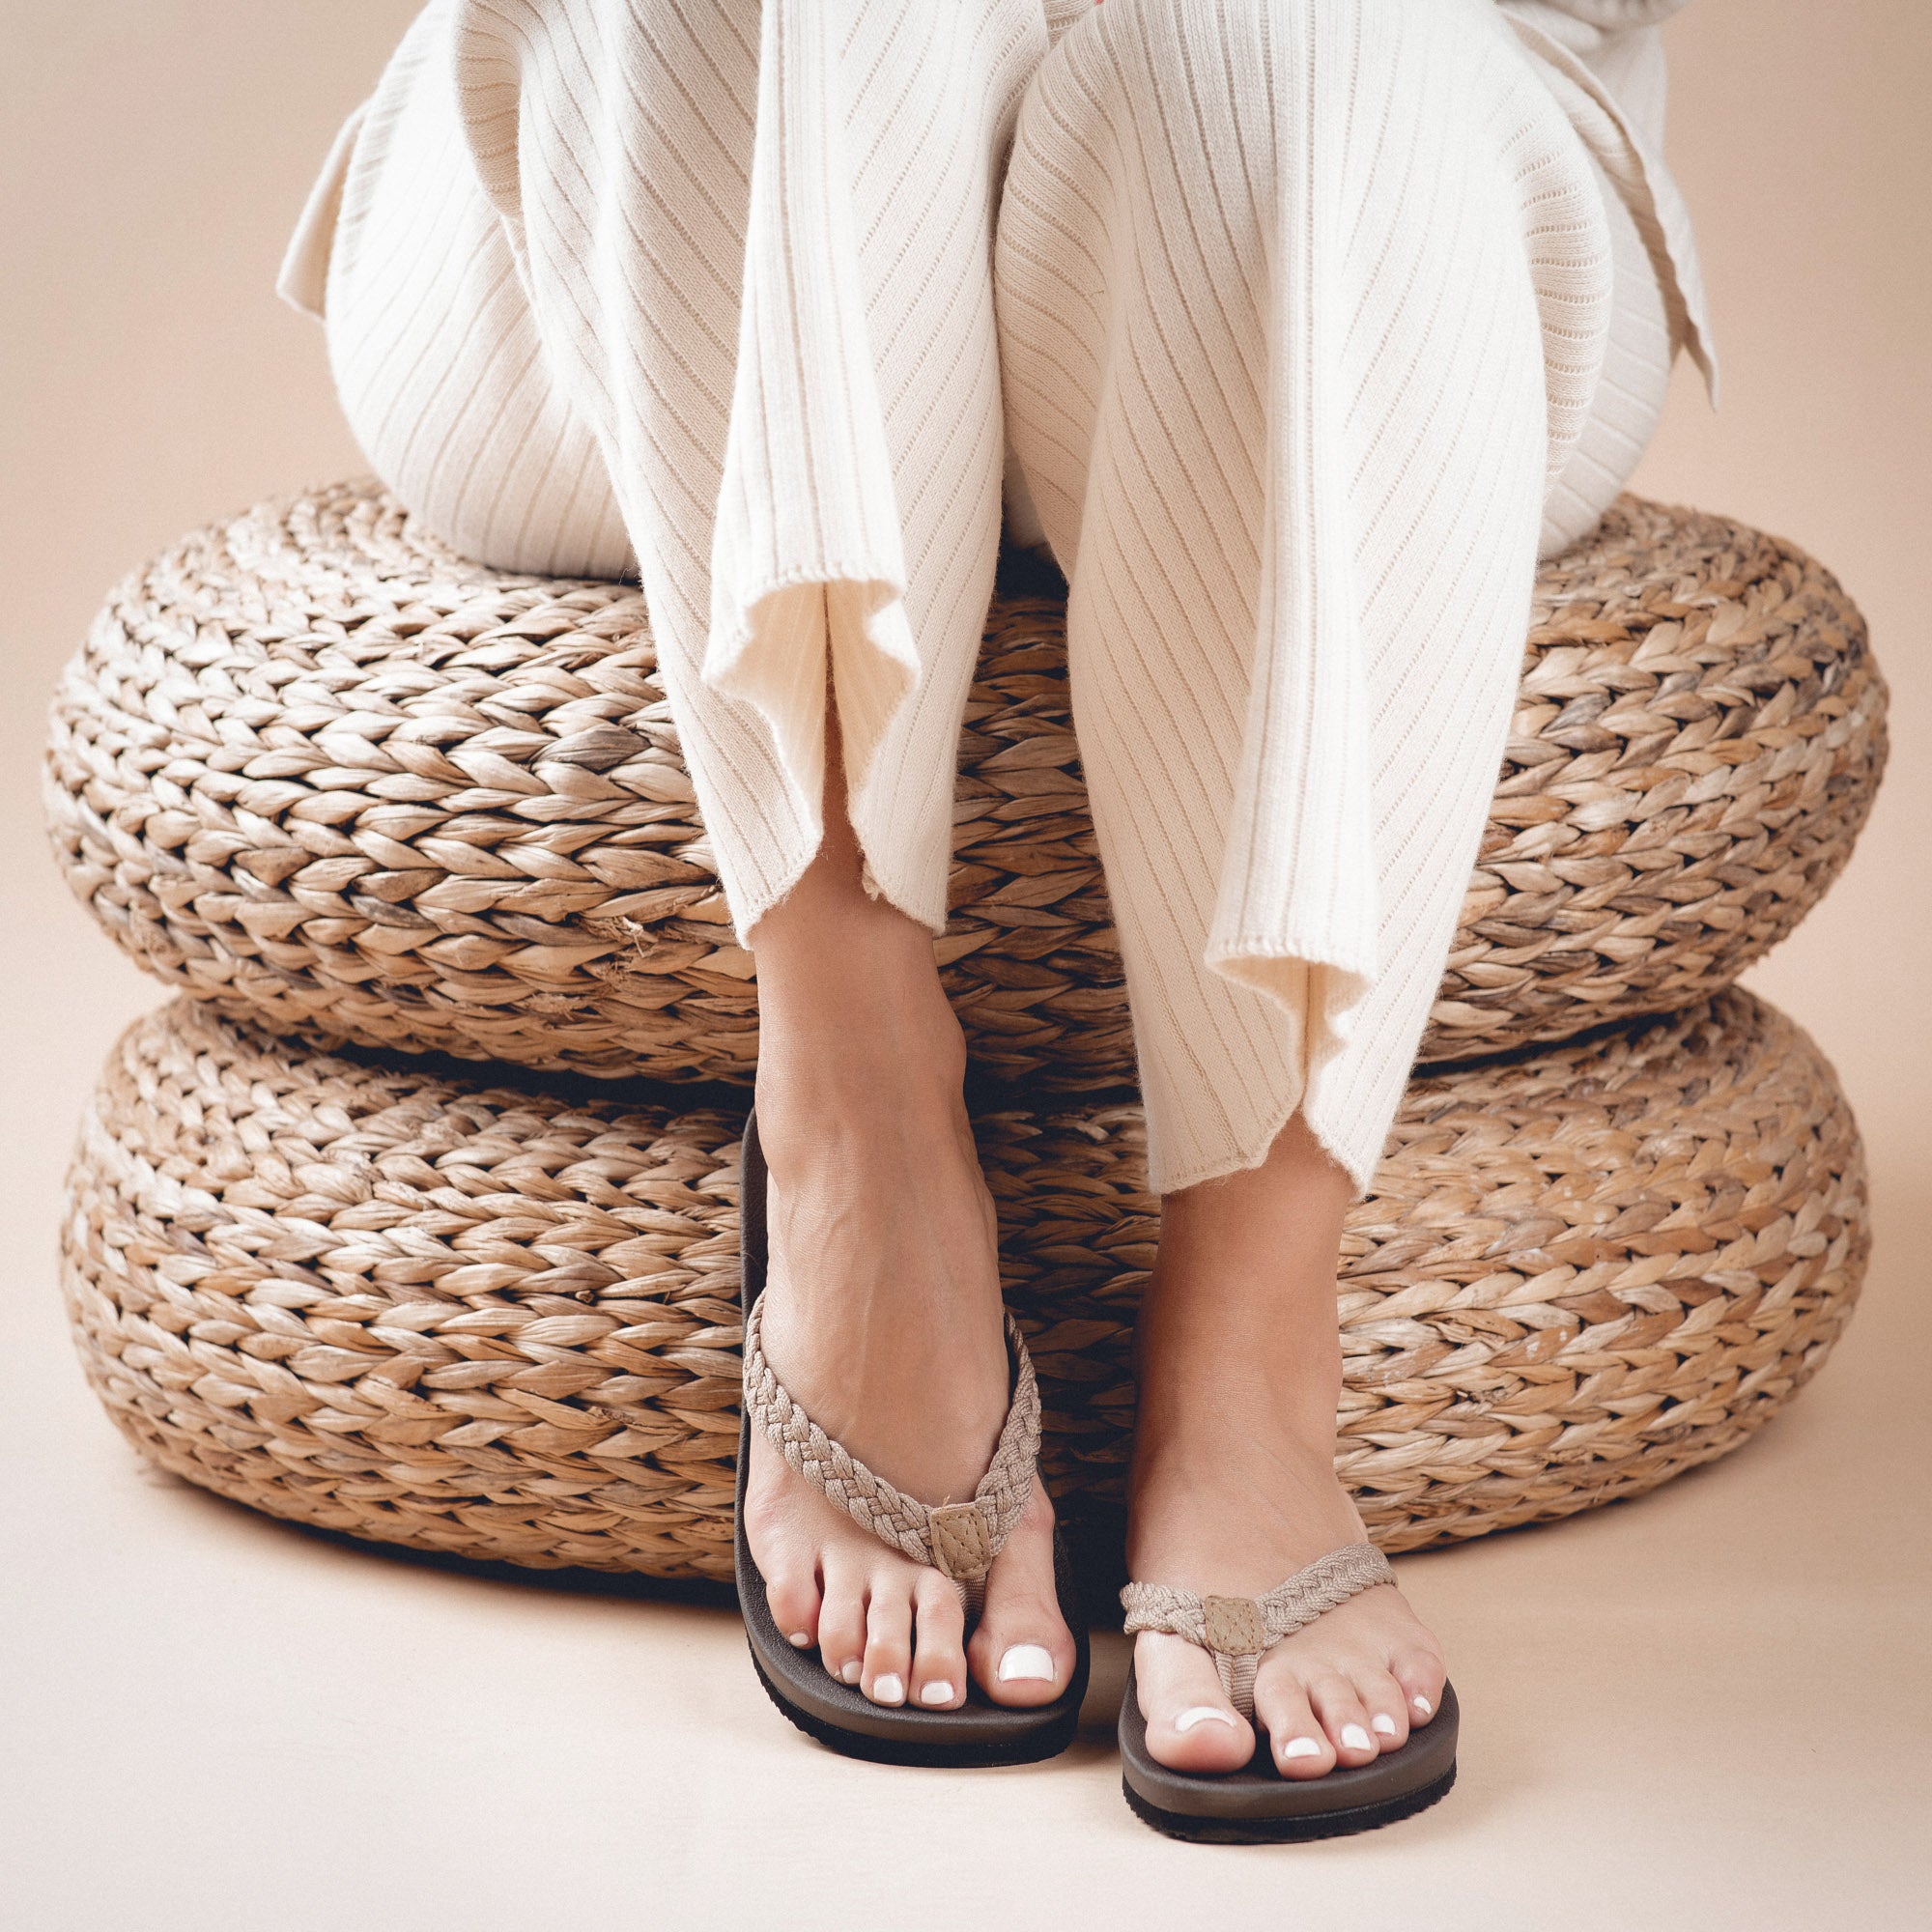 Bay Women Flip Flops with Arch Support